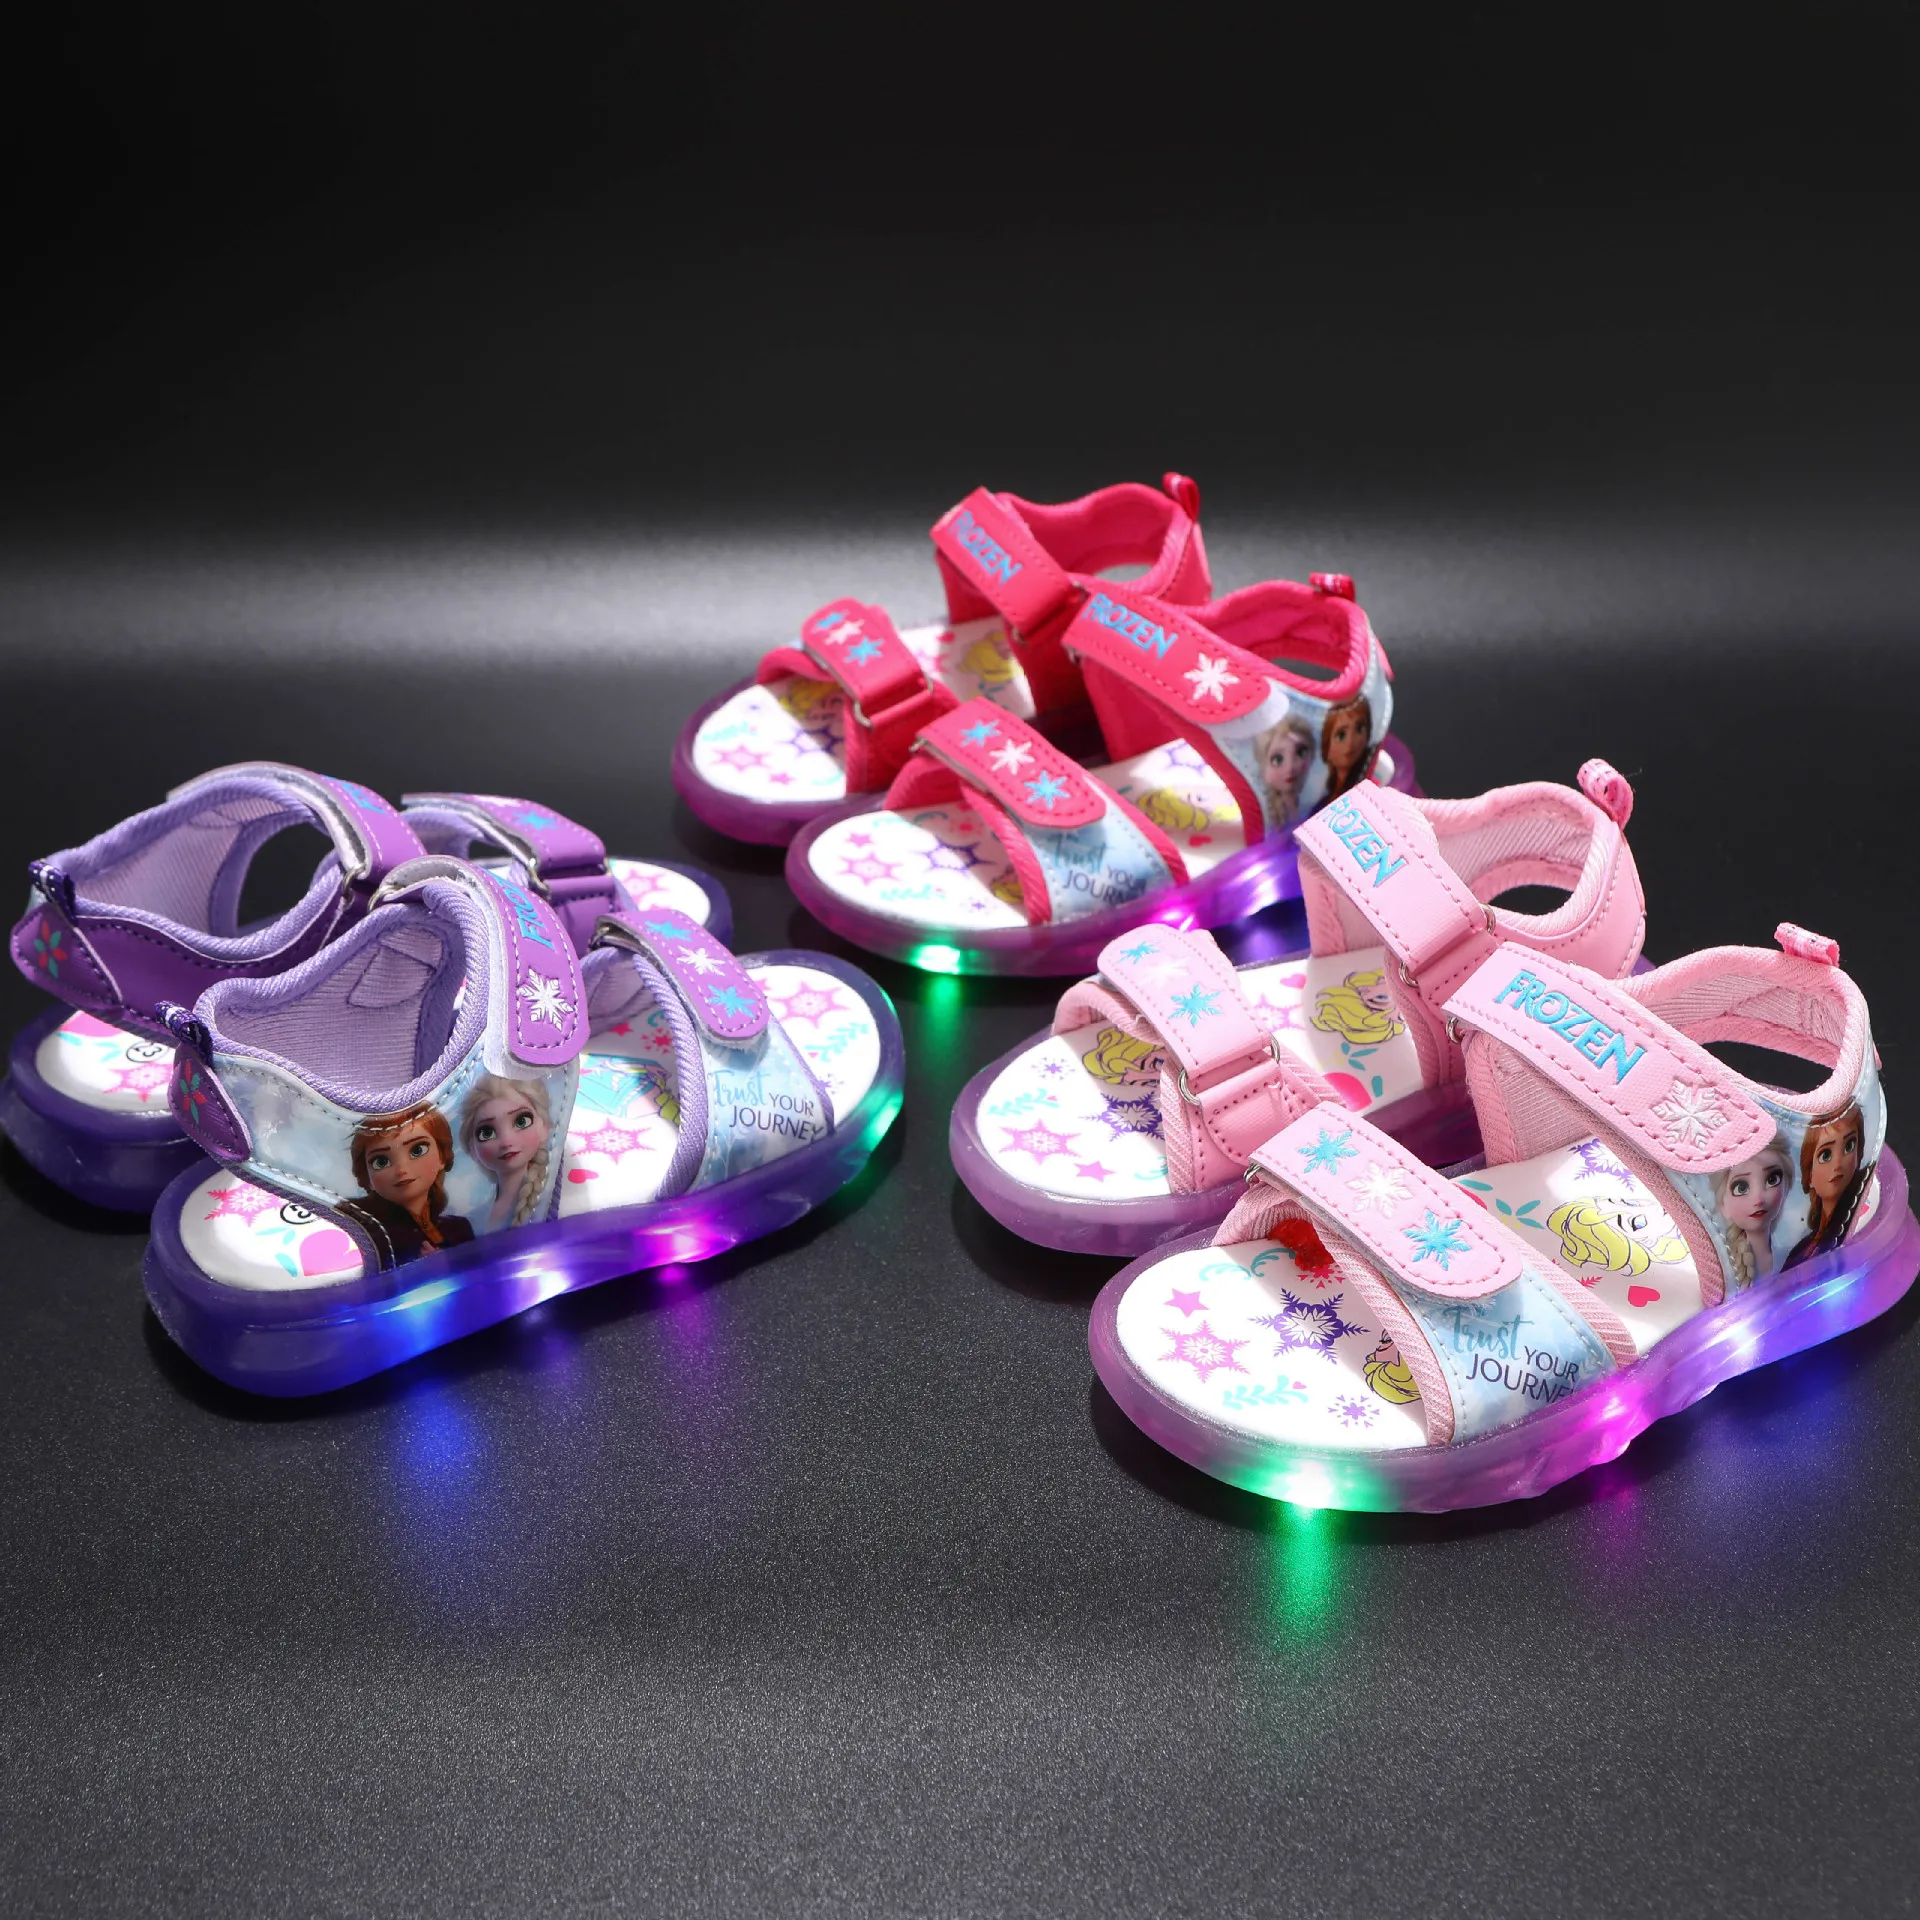 Fashion Lovely Cartoon Summer Kids Sandals Beautiful Lighted LED Children Shoes Hot Sales Cute Girls Sandals Toddlers